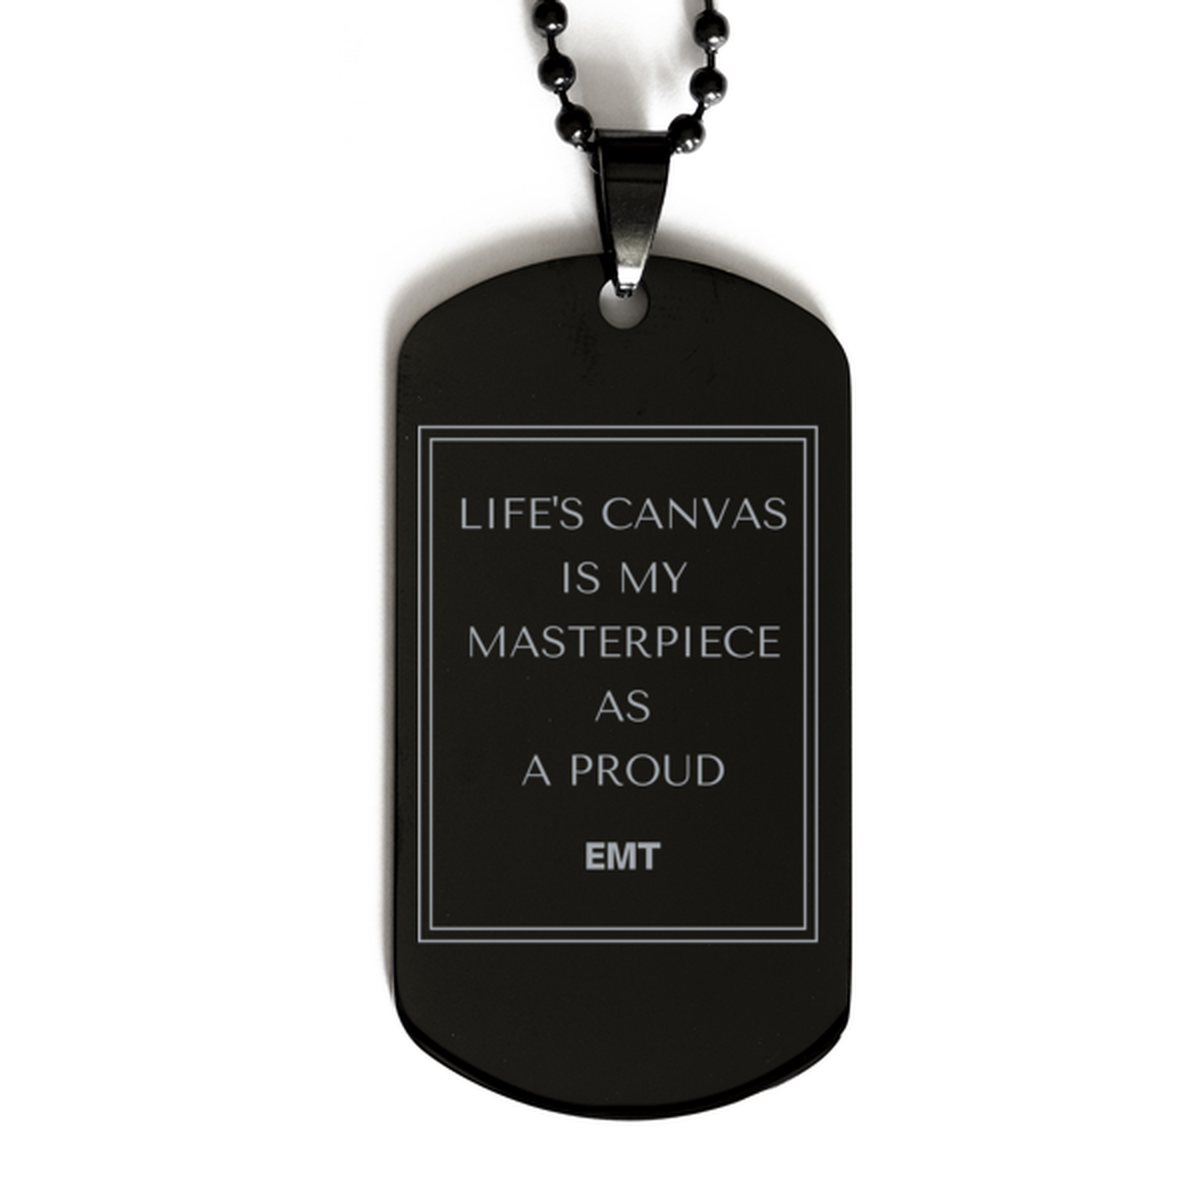 Proud EMT Gifts, Life's canvas is my masterpiece, Epic Birthday Christmas Unique Black Dog Tag For EMT, Coworkers, Men, Women, Friends